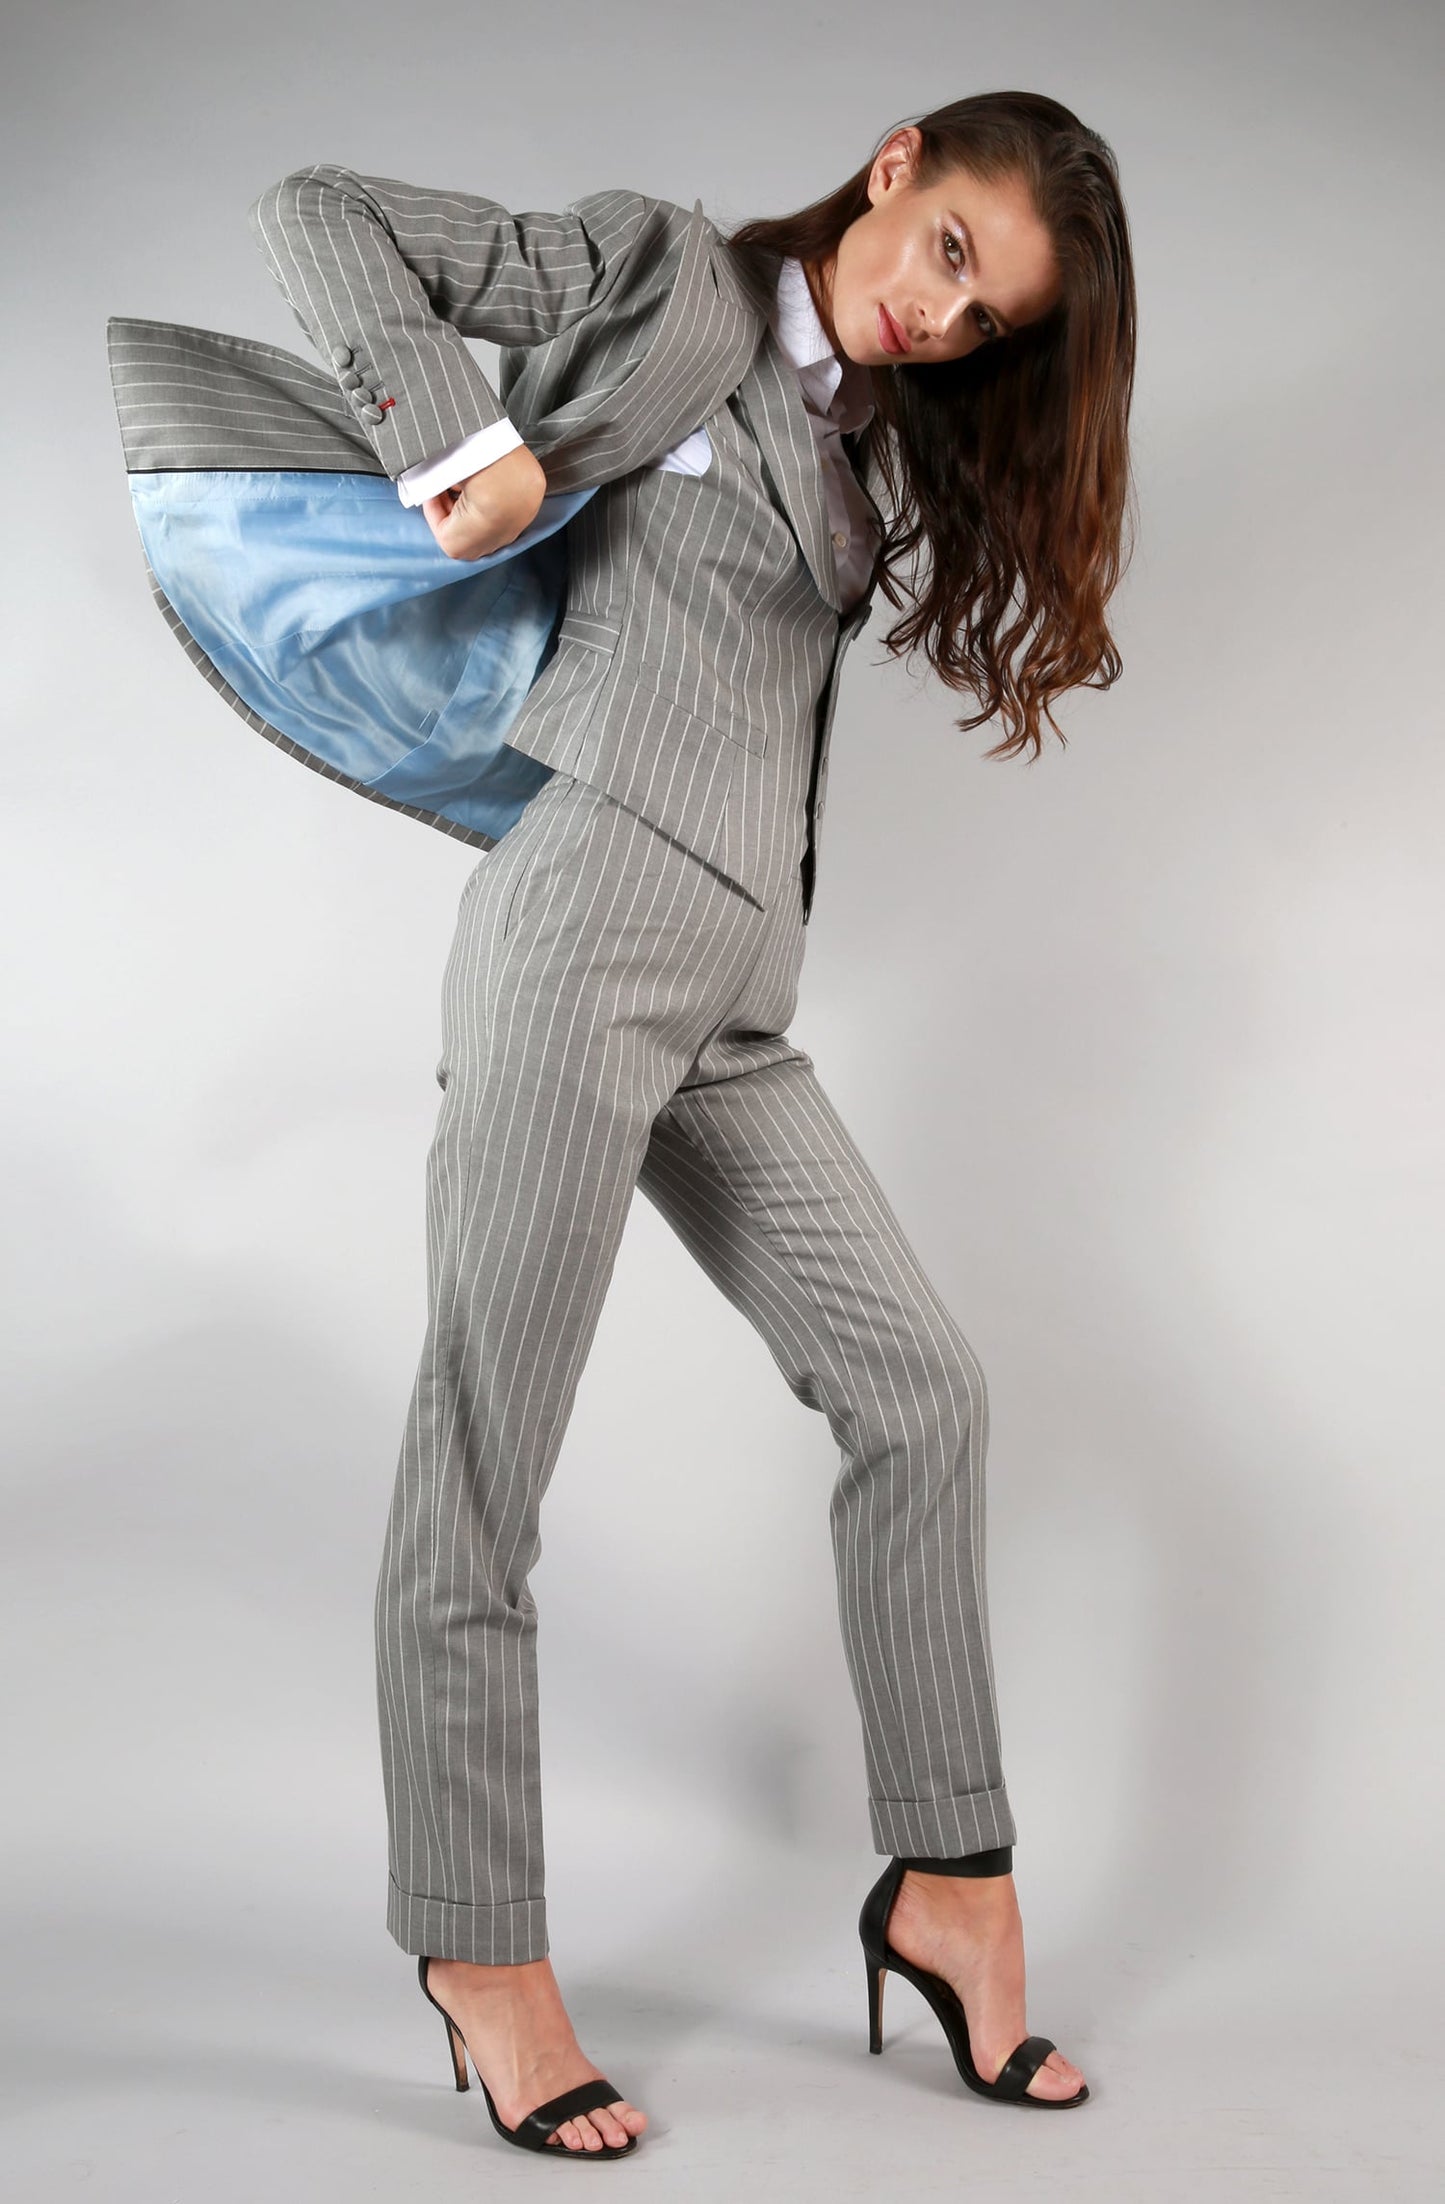 The Powerhouse - Women's Custom Suits Tailored in New York